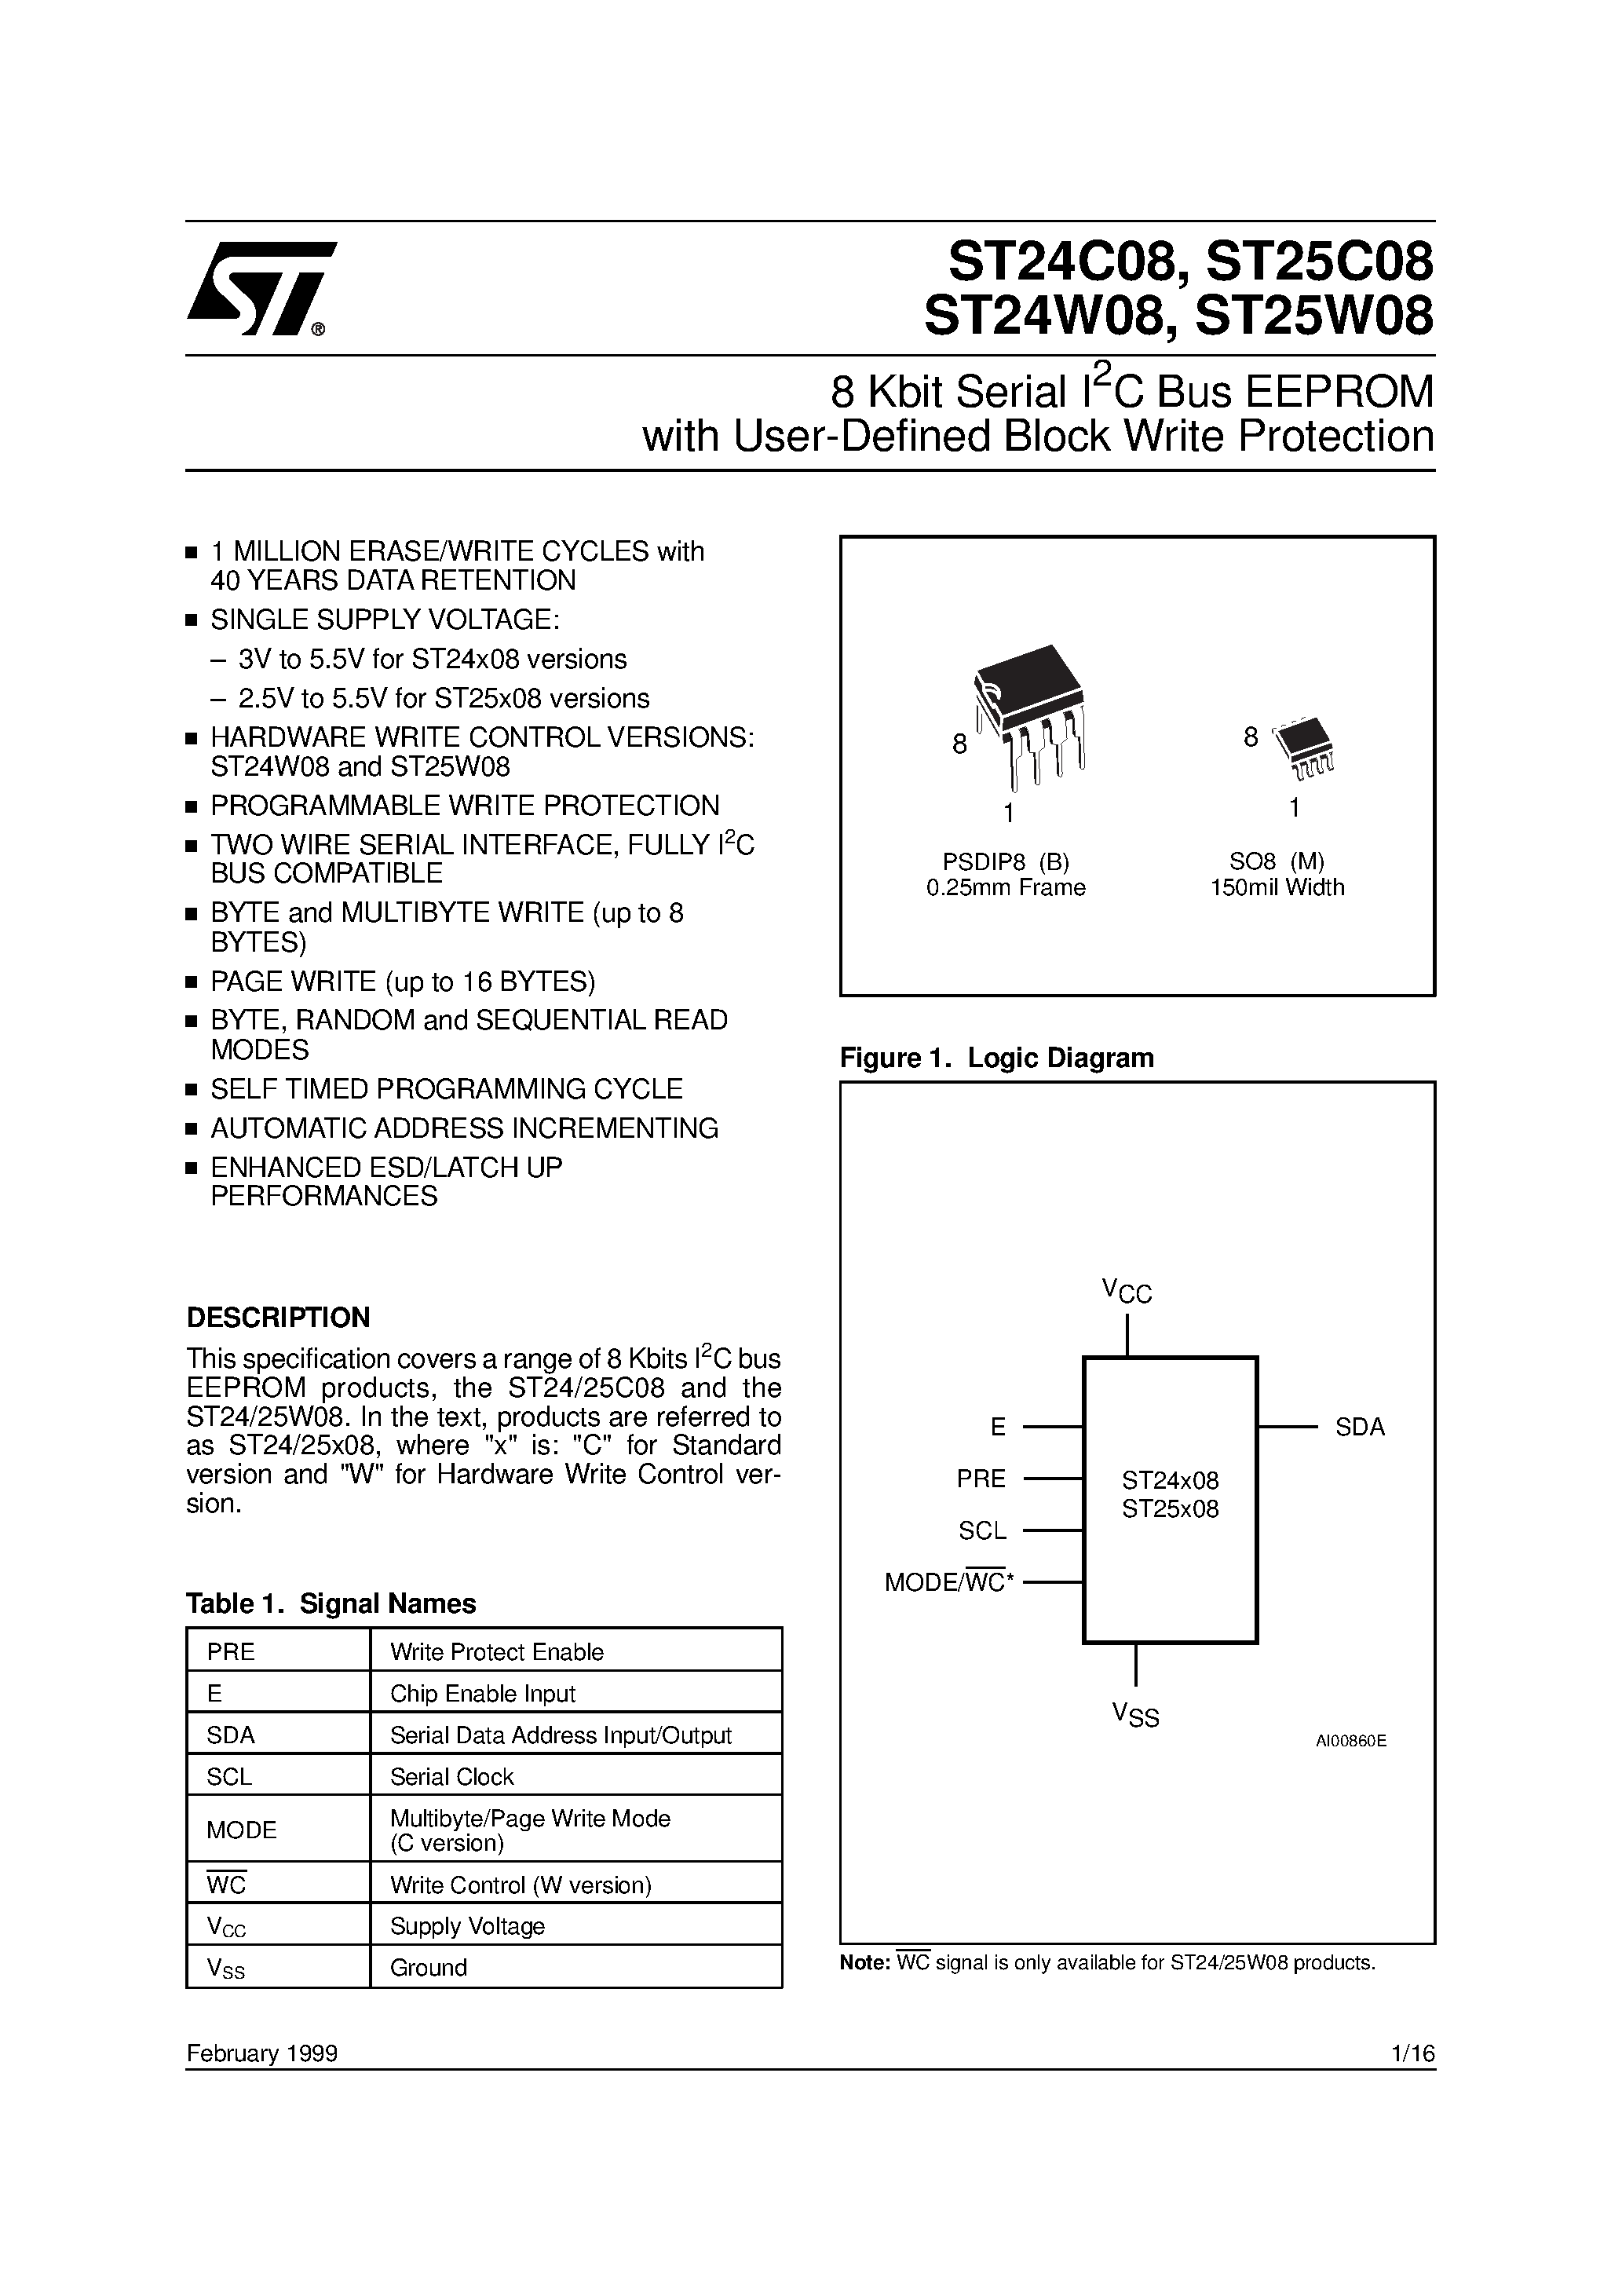 Datasheet ST24C08 - 8 Kbit Serial I2C Bus EEPROM with User-Defined Block Write Protection page 1